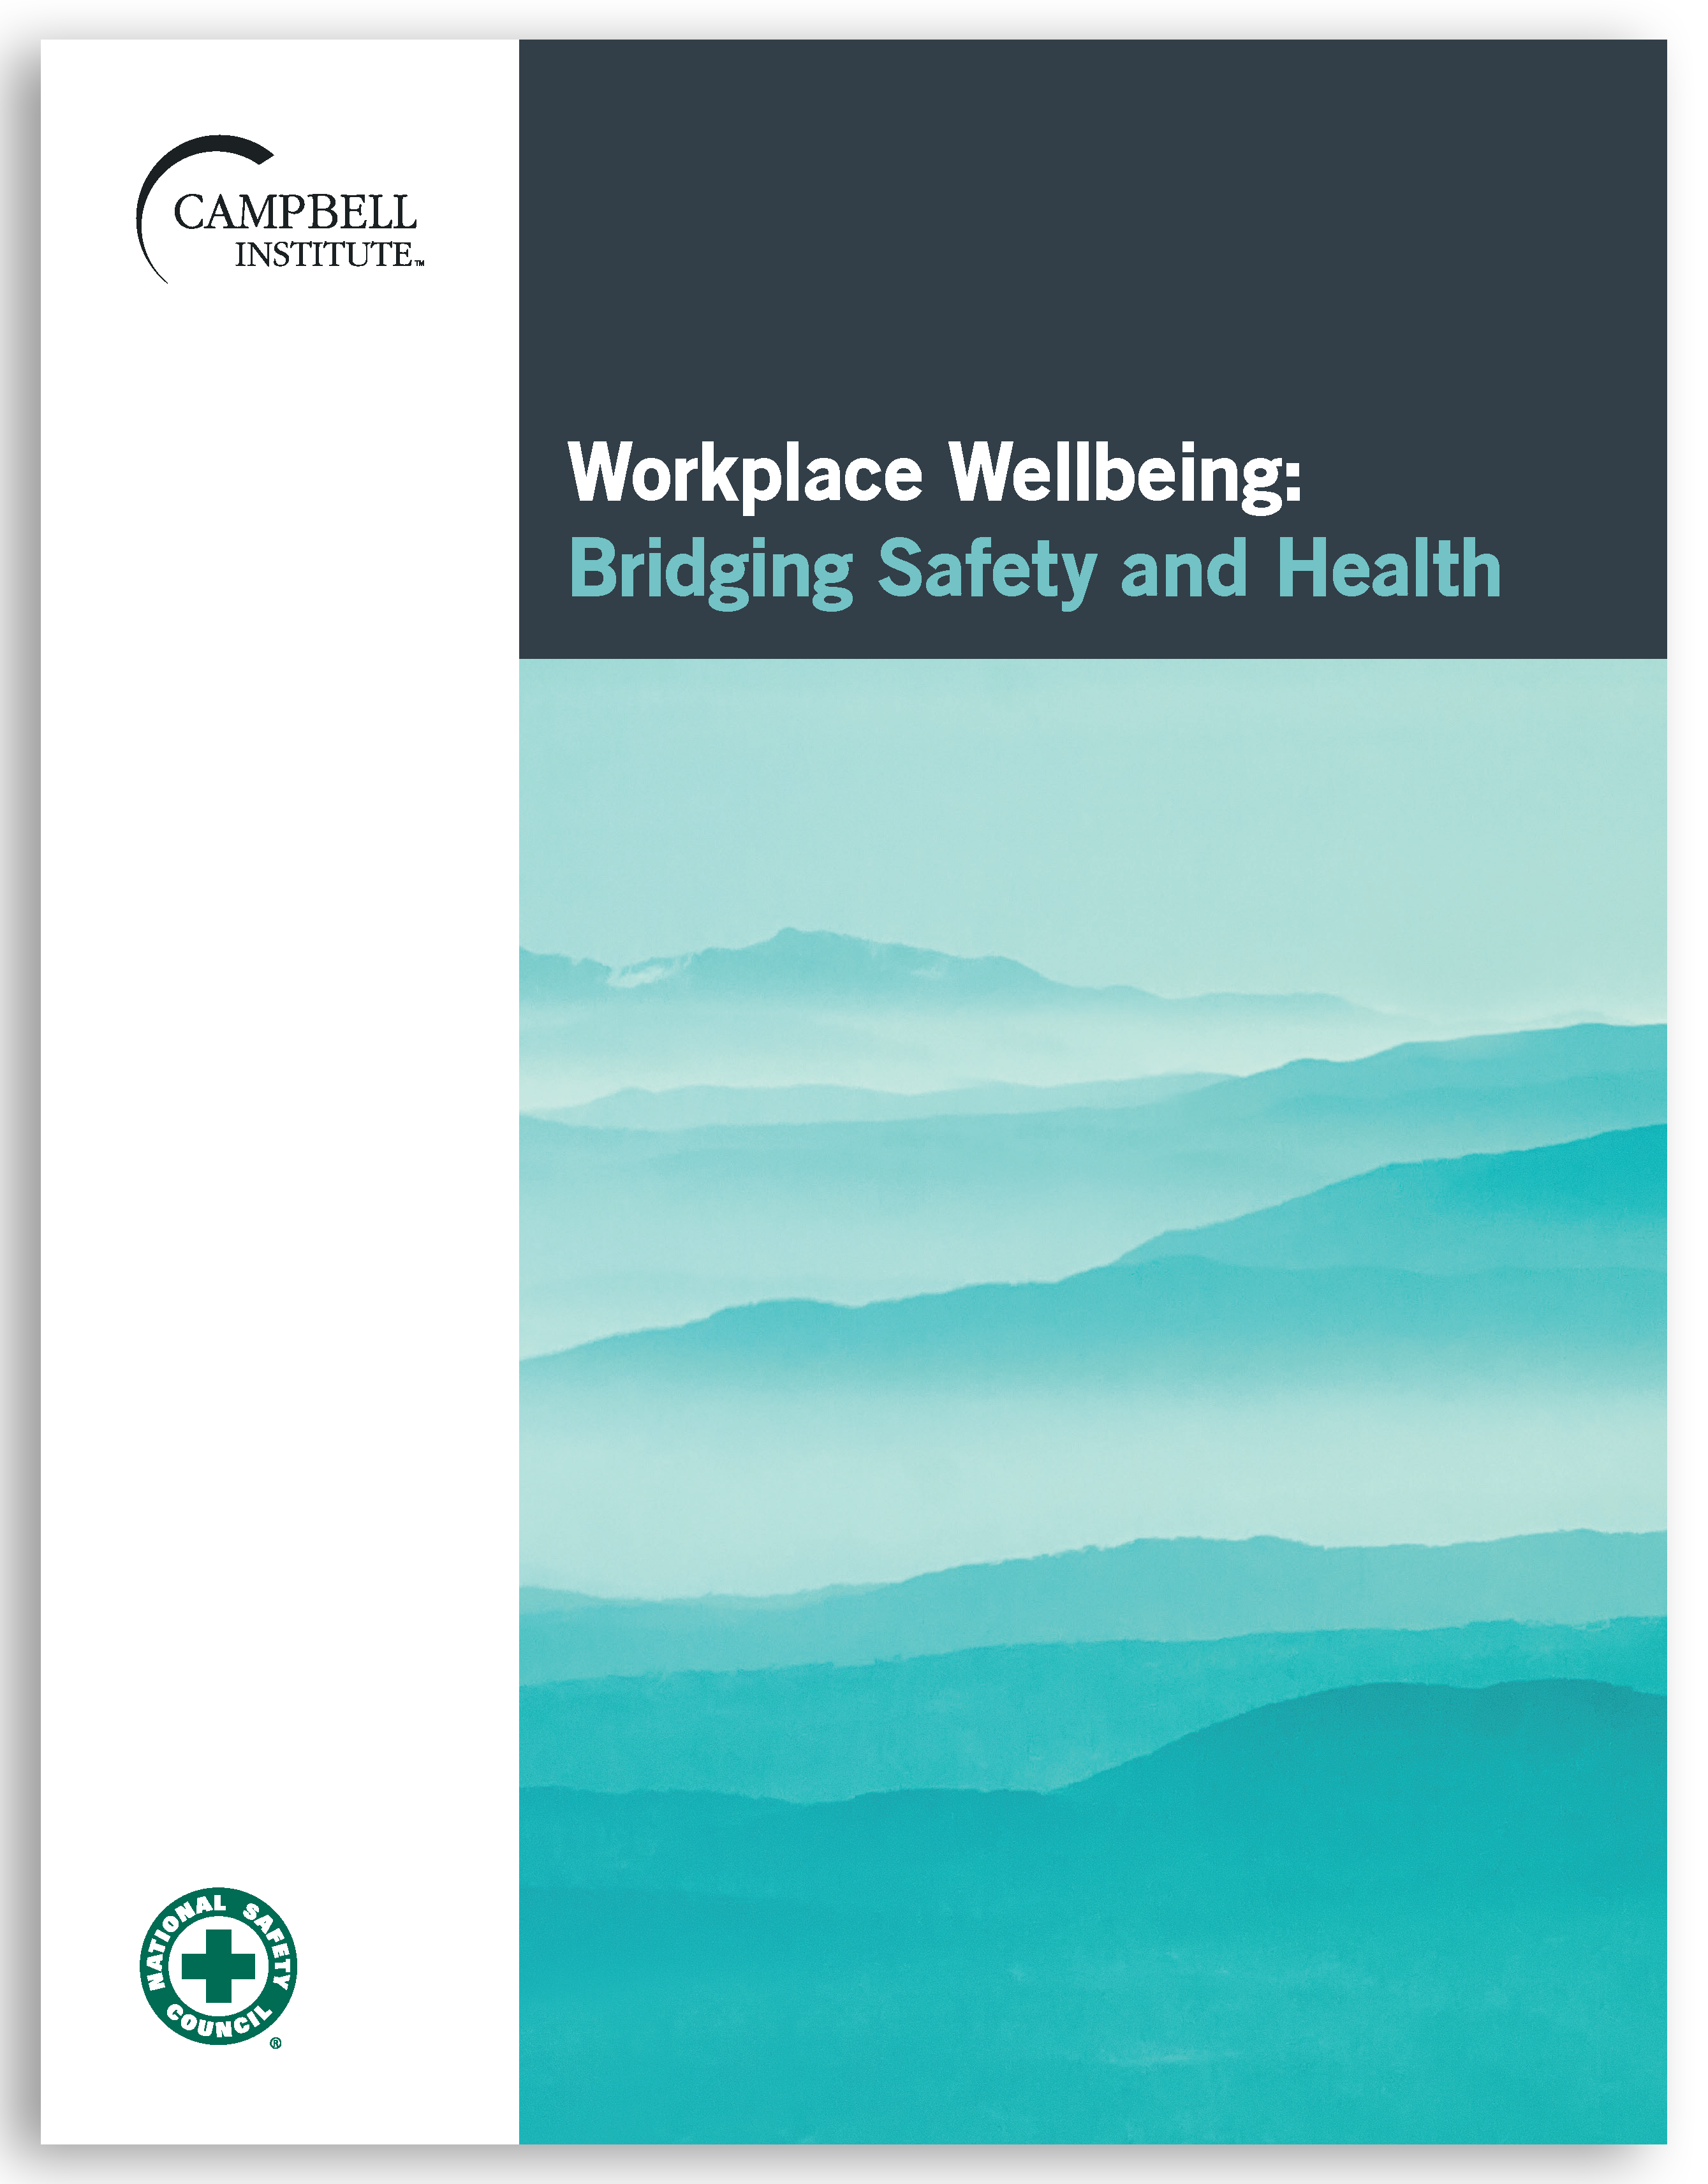 Workplace Wellbeing: Bridging Safety and Health